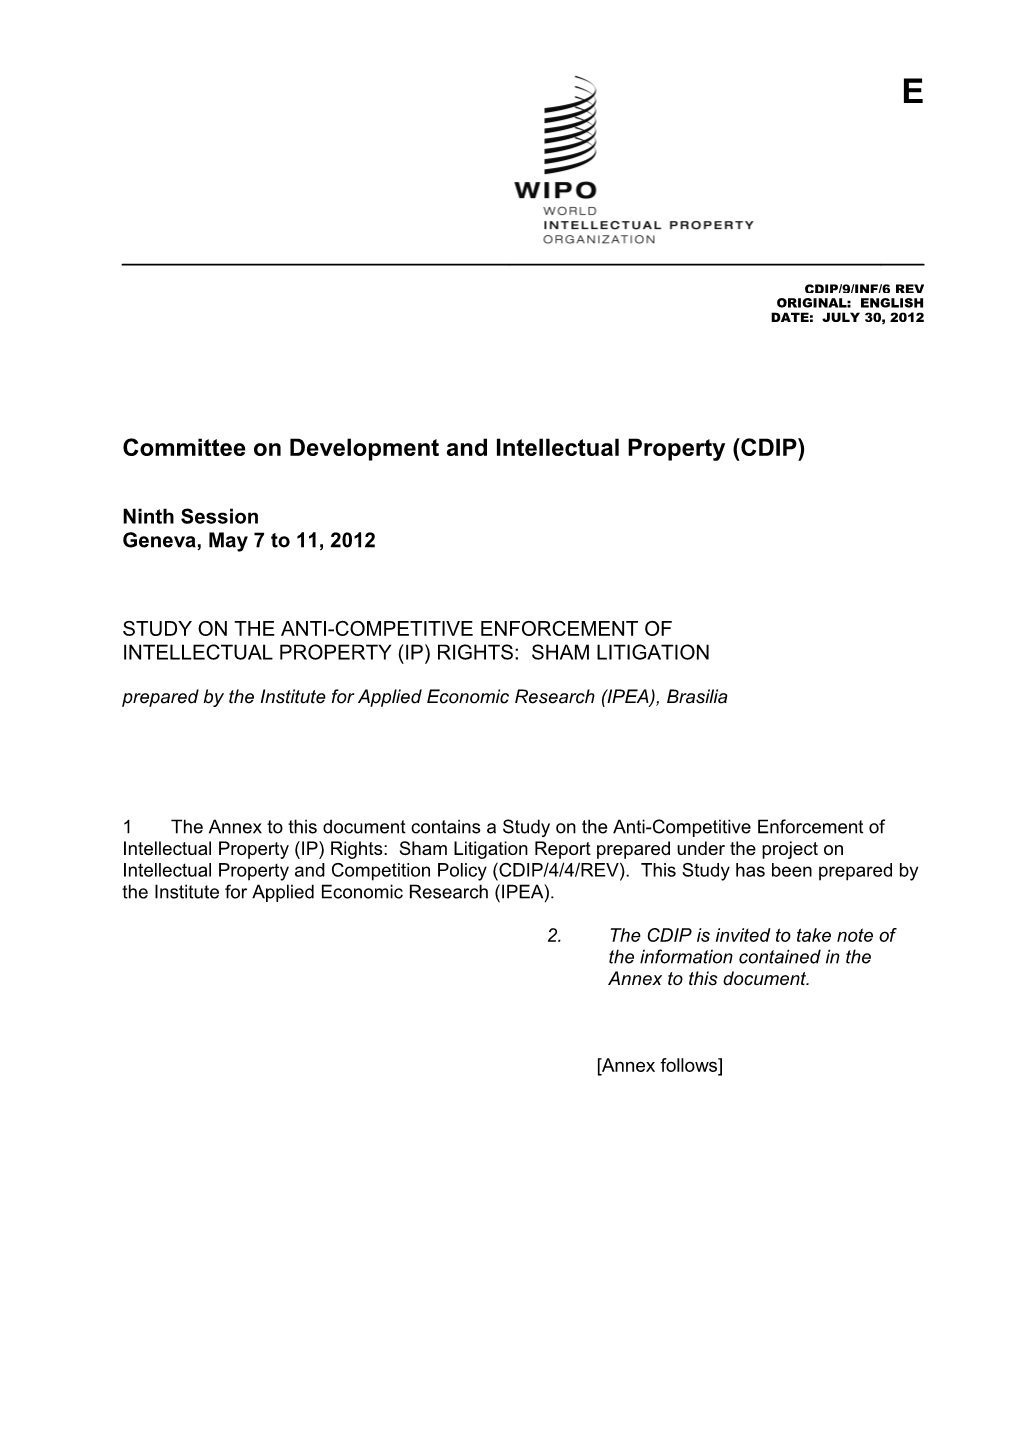 Committee on Development and Intellectual Property (CDIP) s2